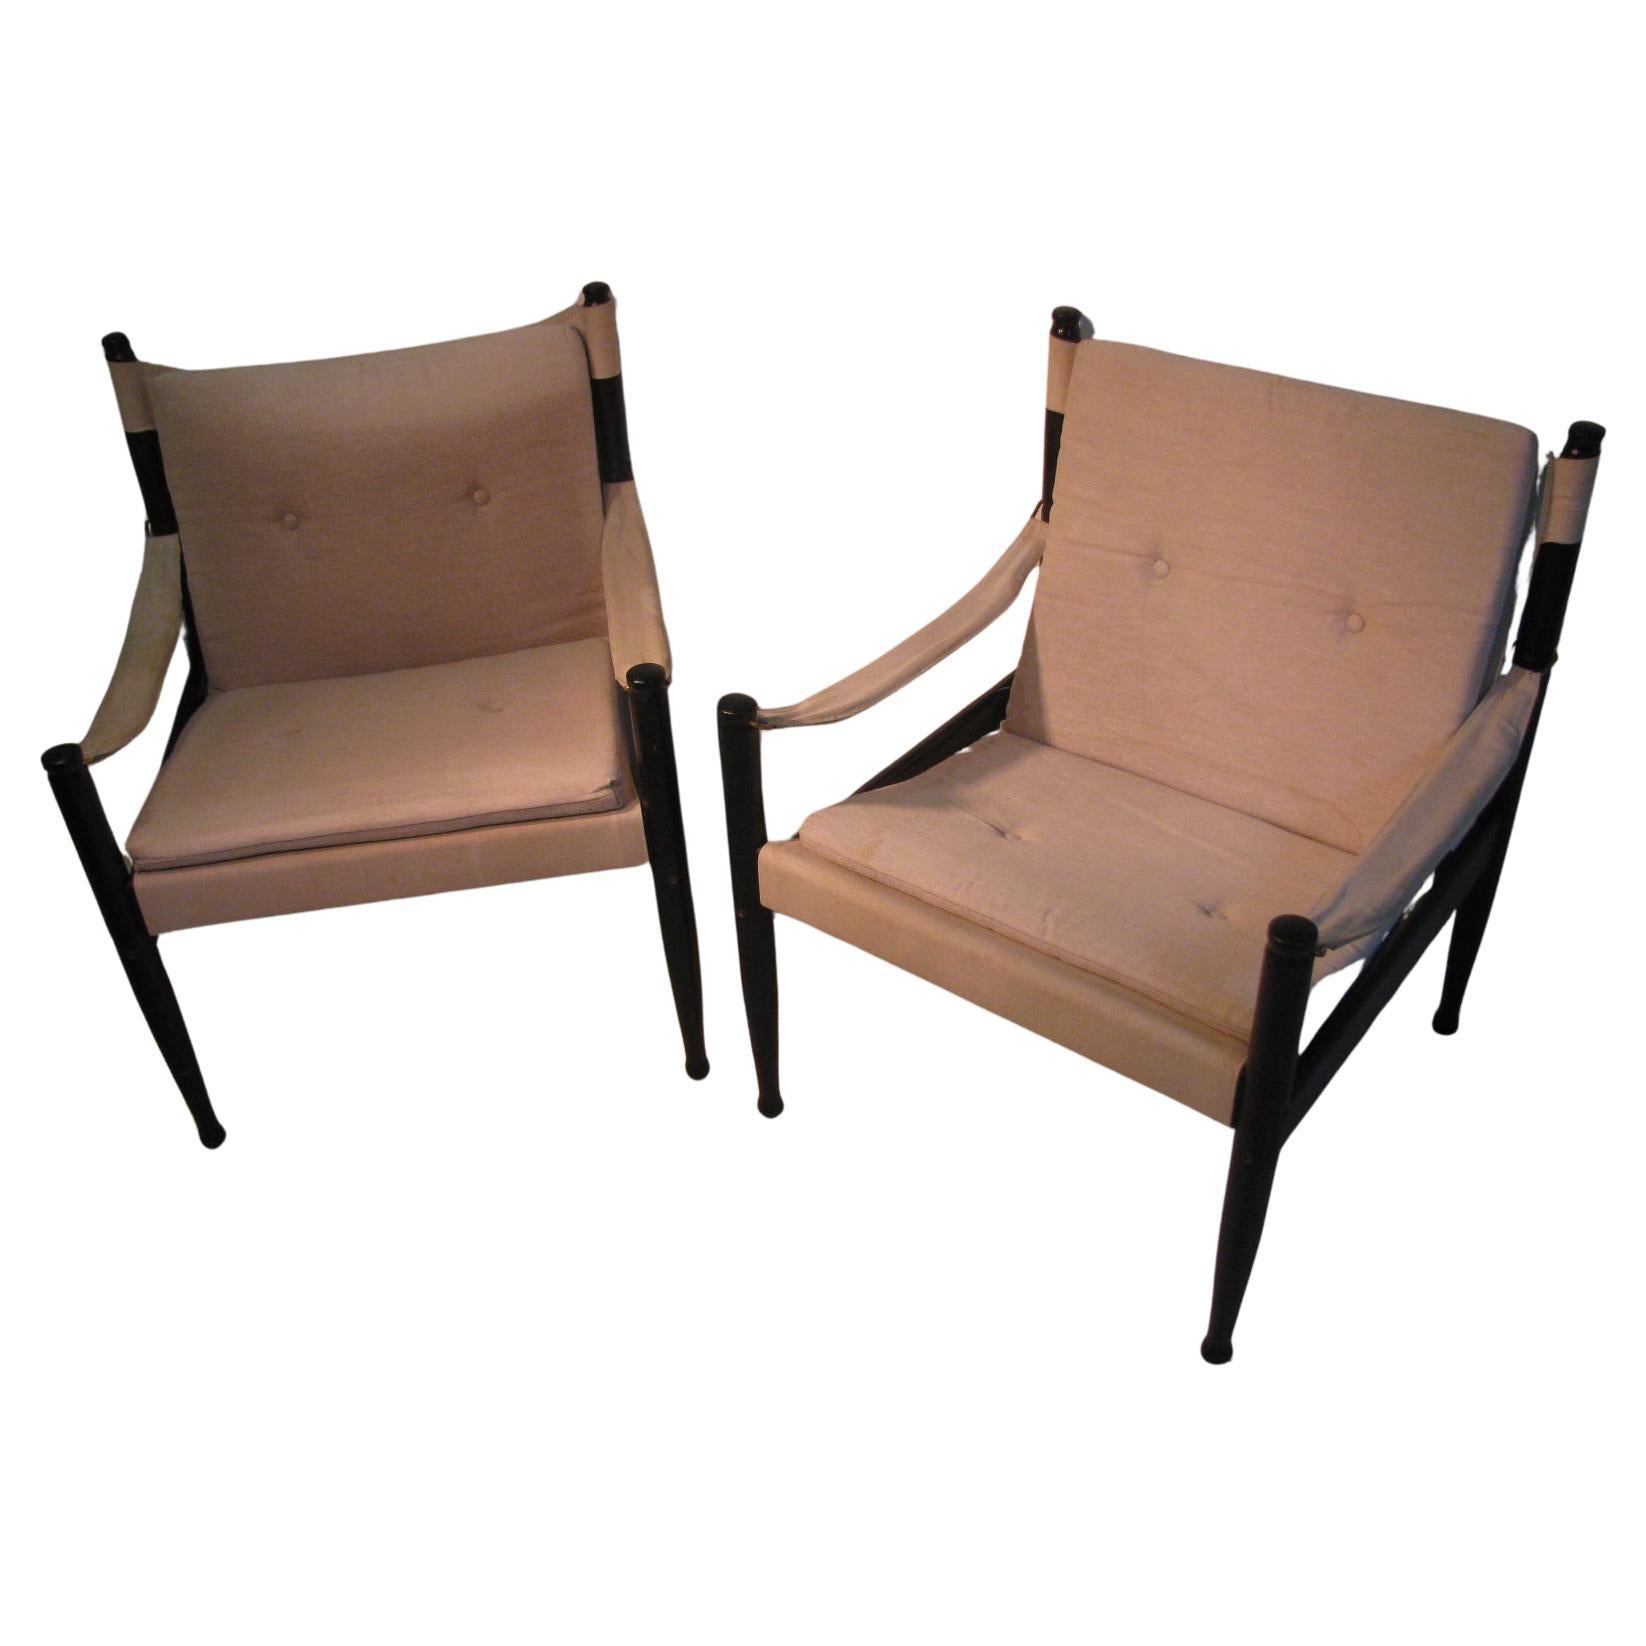 Wonderful pair of safari lounge chairs by Erik Worts for Niels Eilersen. Black Enameled with canvas upholstery, chairs are in very good condition with some water stains on the canvas.